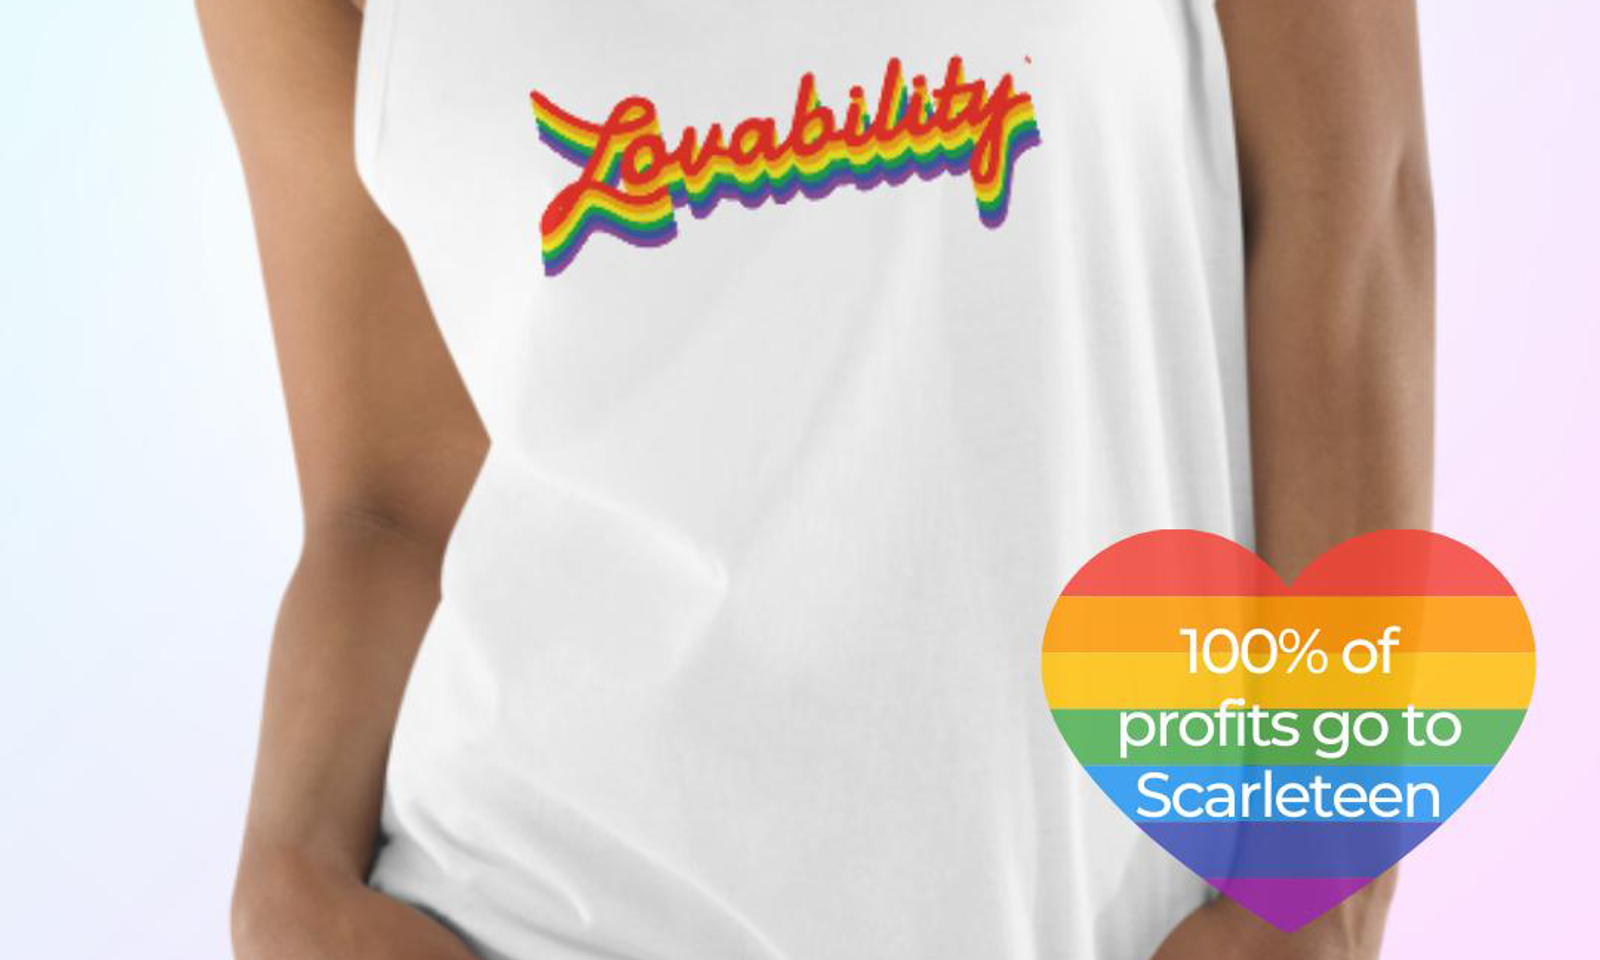 Lovability Donates Profits of Pride Shirt Sales to Scarleteen